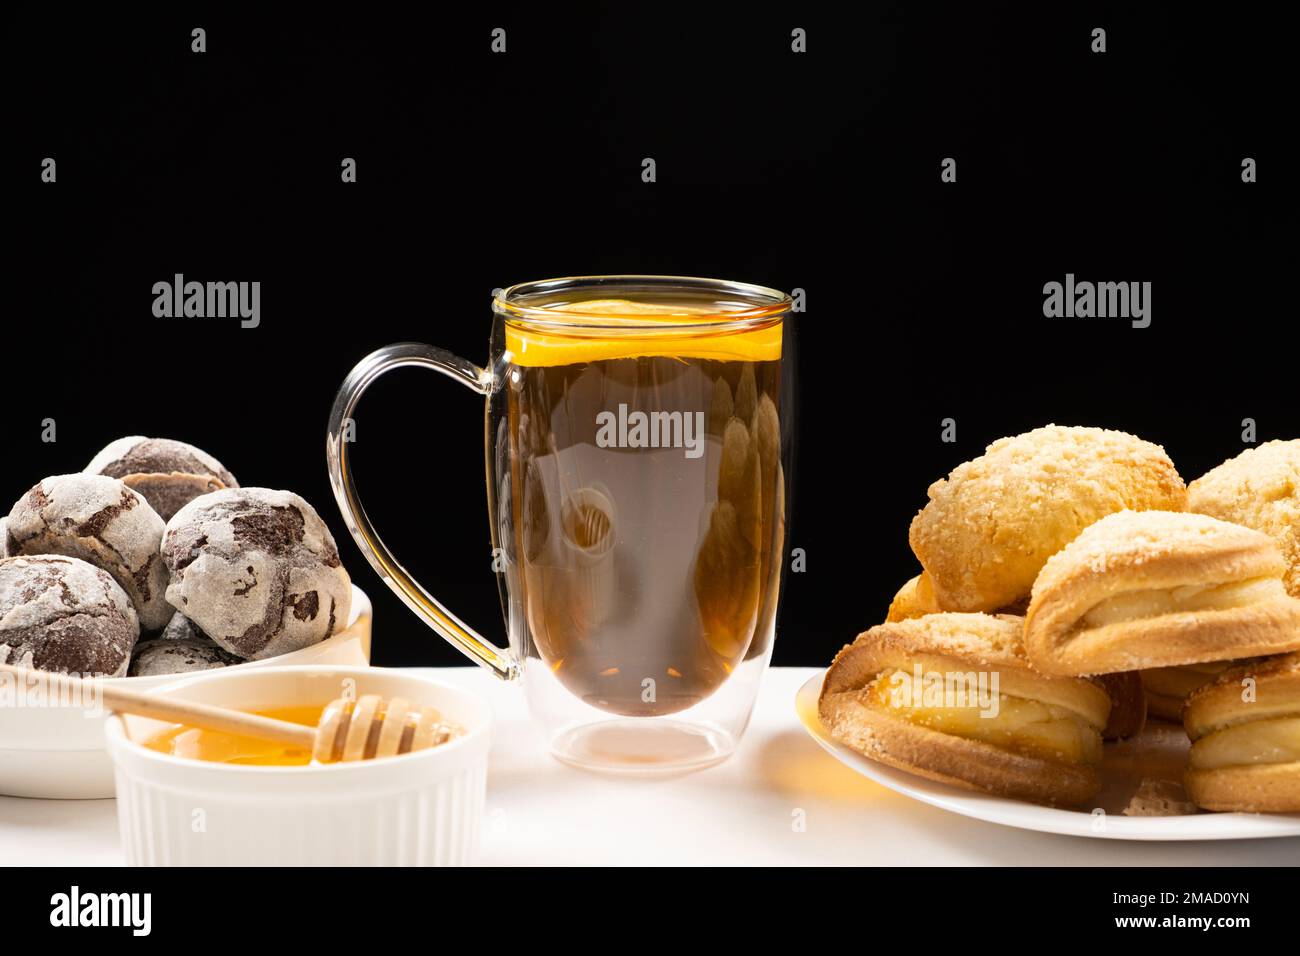 Tea with lemon and honey with cocoa cookies and cakes with creamy filling on a black background. Stock Photo